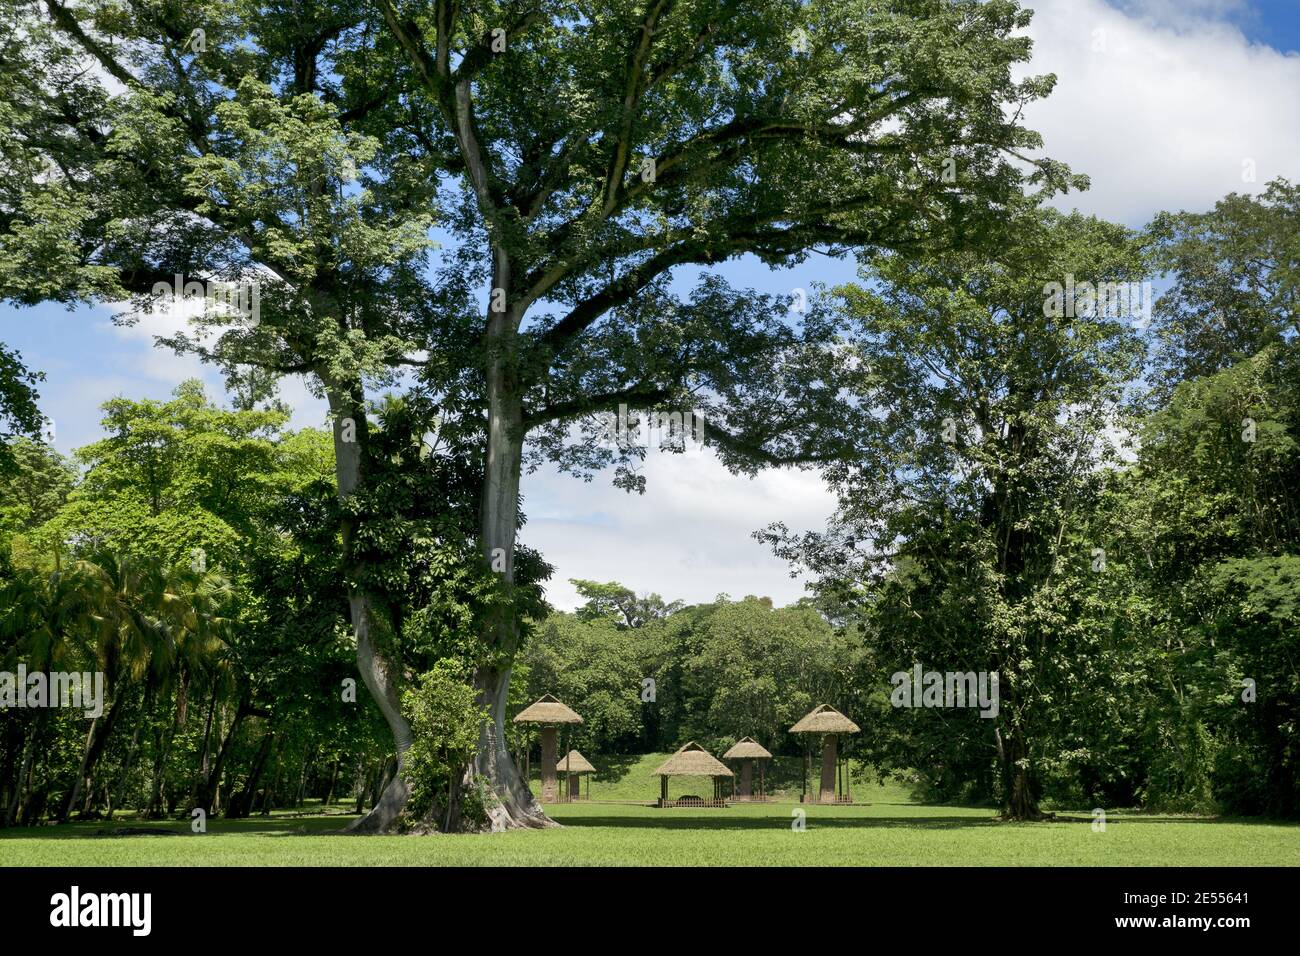 Quirigua, Guatemala, Central America: antique mayan stelas with huge tree. Quirigua is an ancient Maya archaeological site in the department of Izabal. Stock Photo